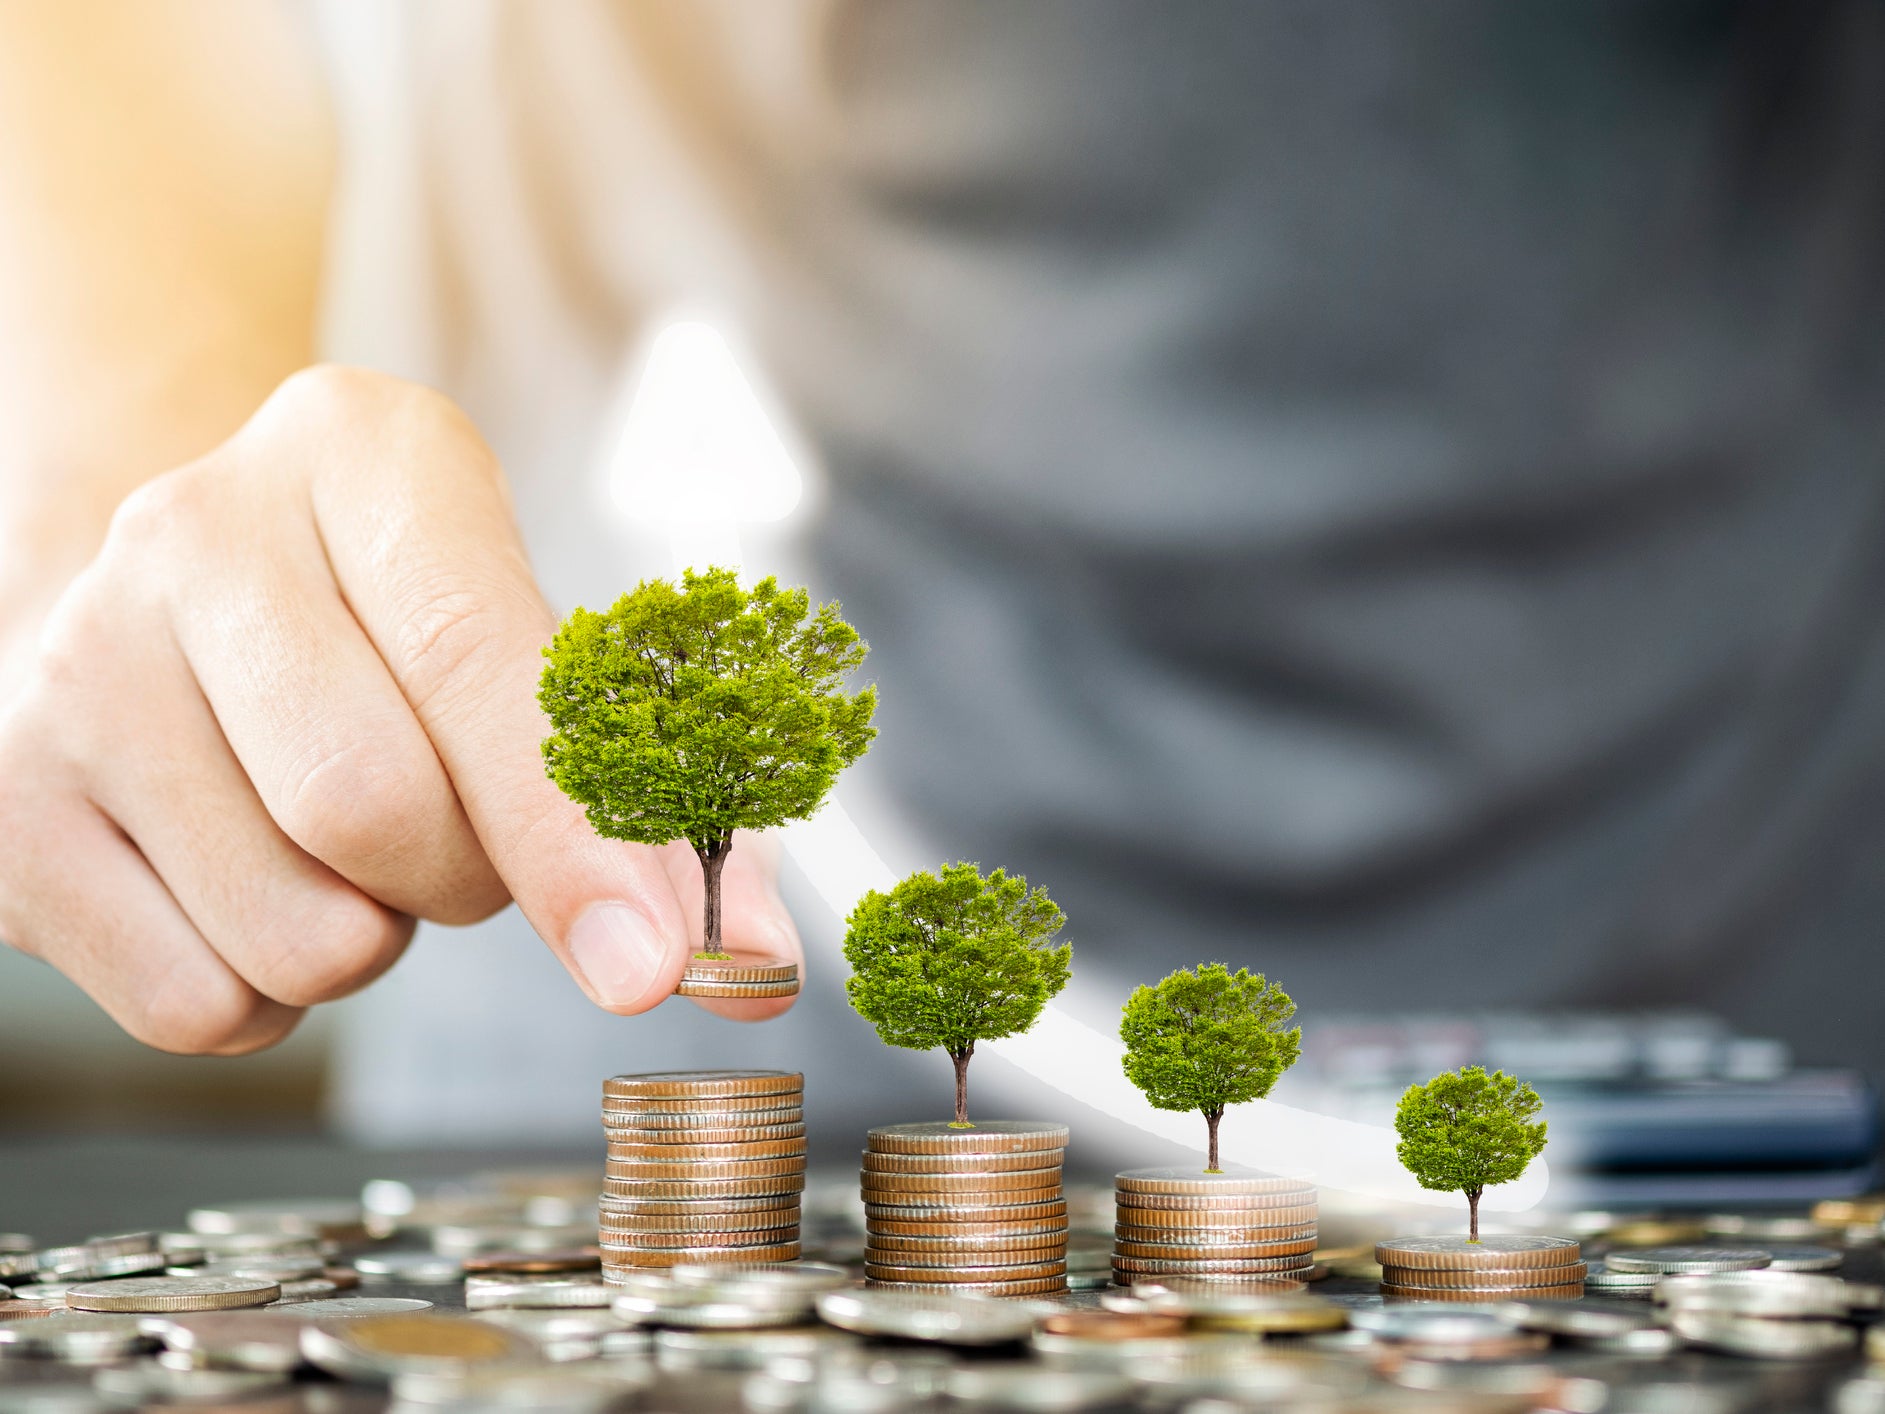 Stock image illustrating the concept of a green economic recovery